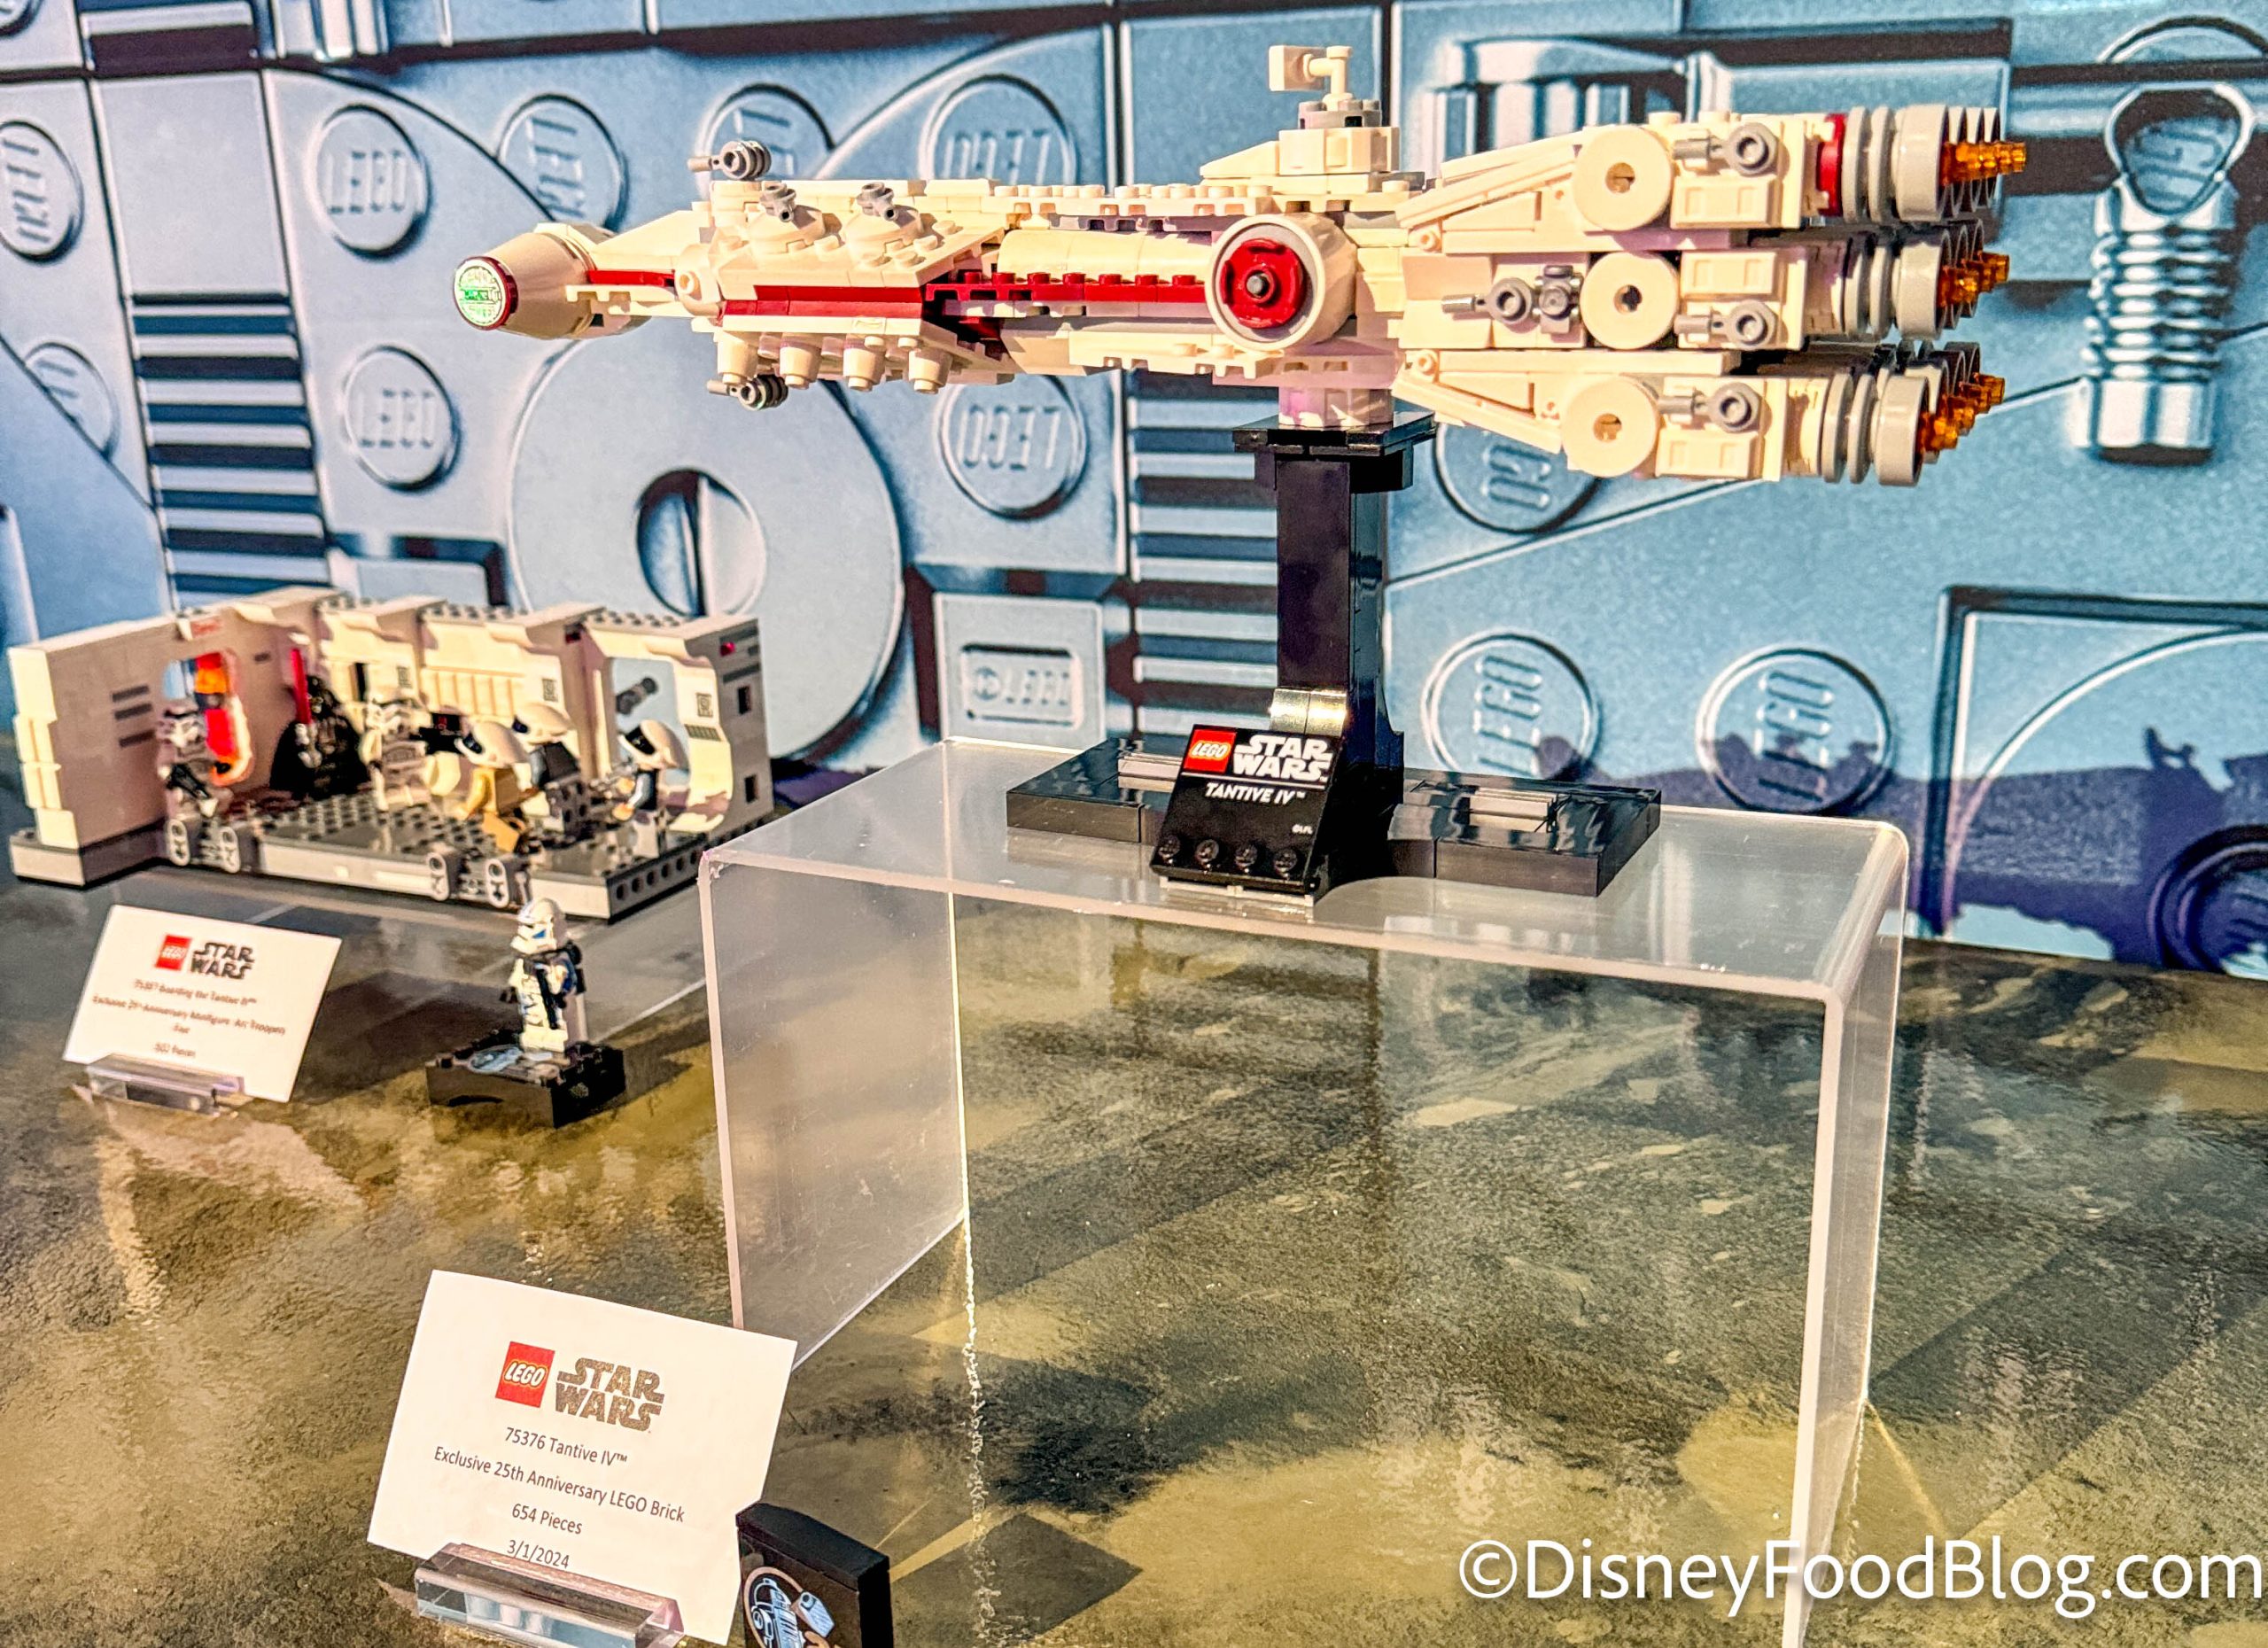 New Disney 100 'Up' House LEGO Set Coming Soon - WDW News Today